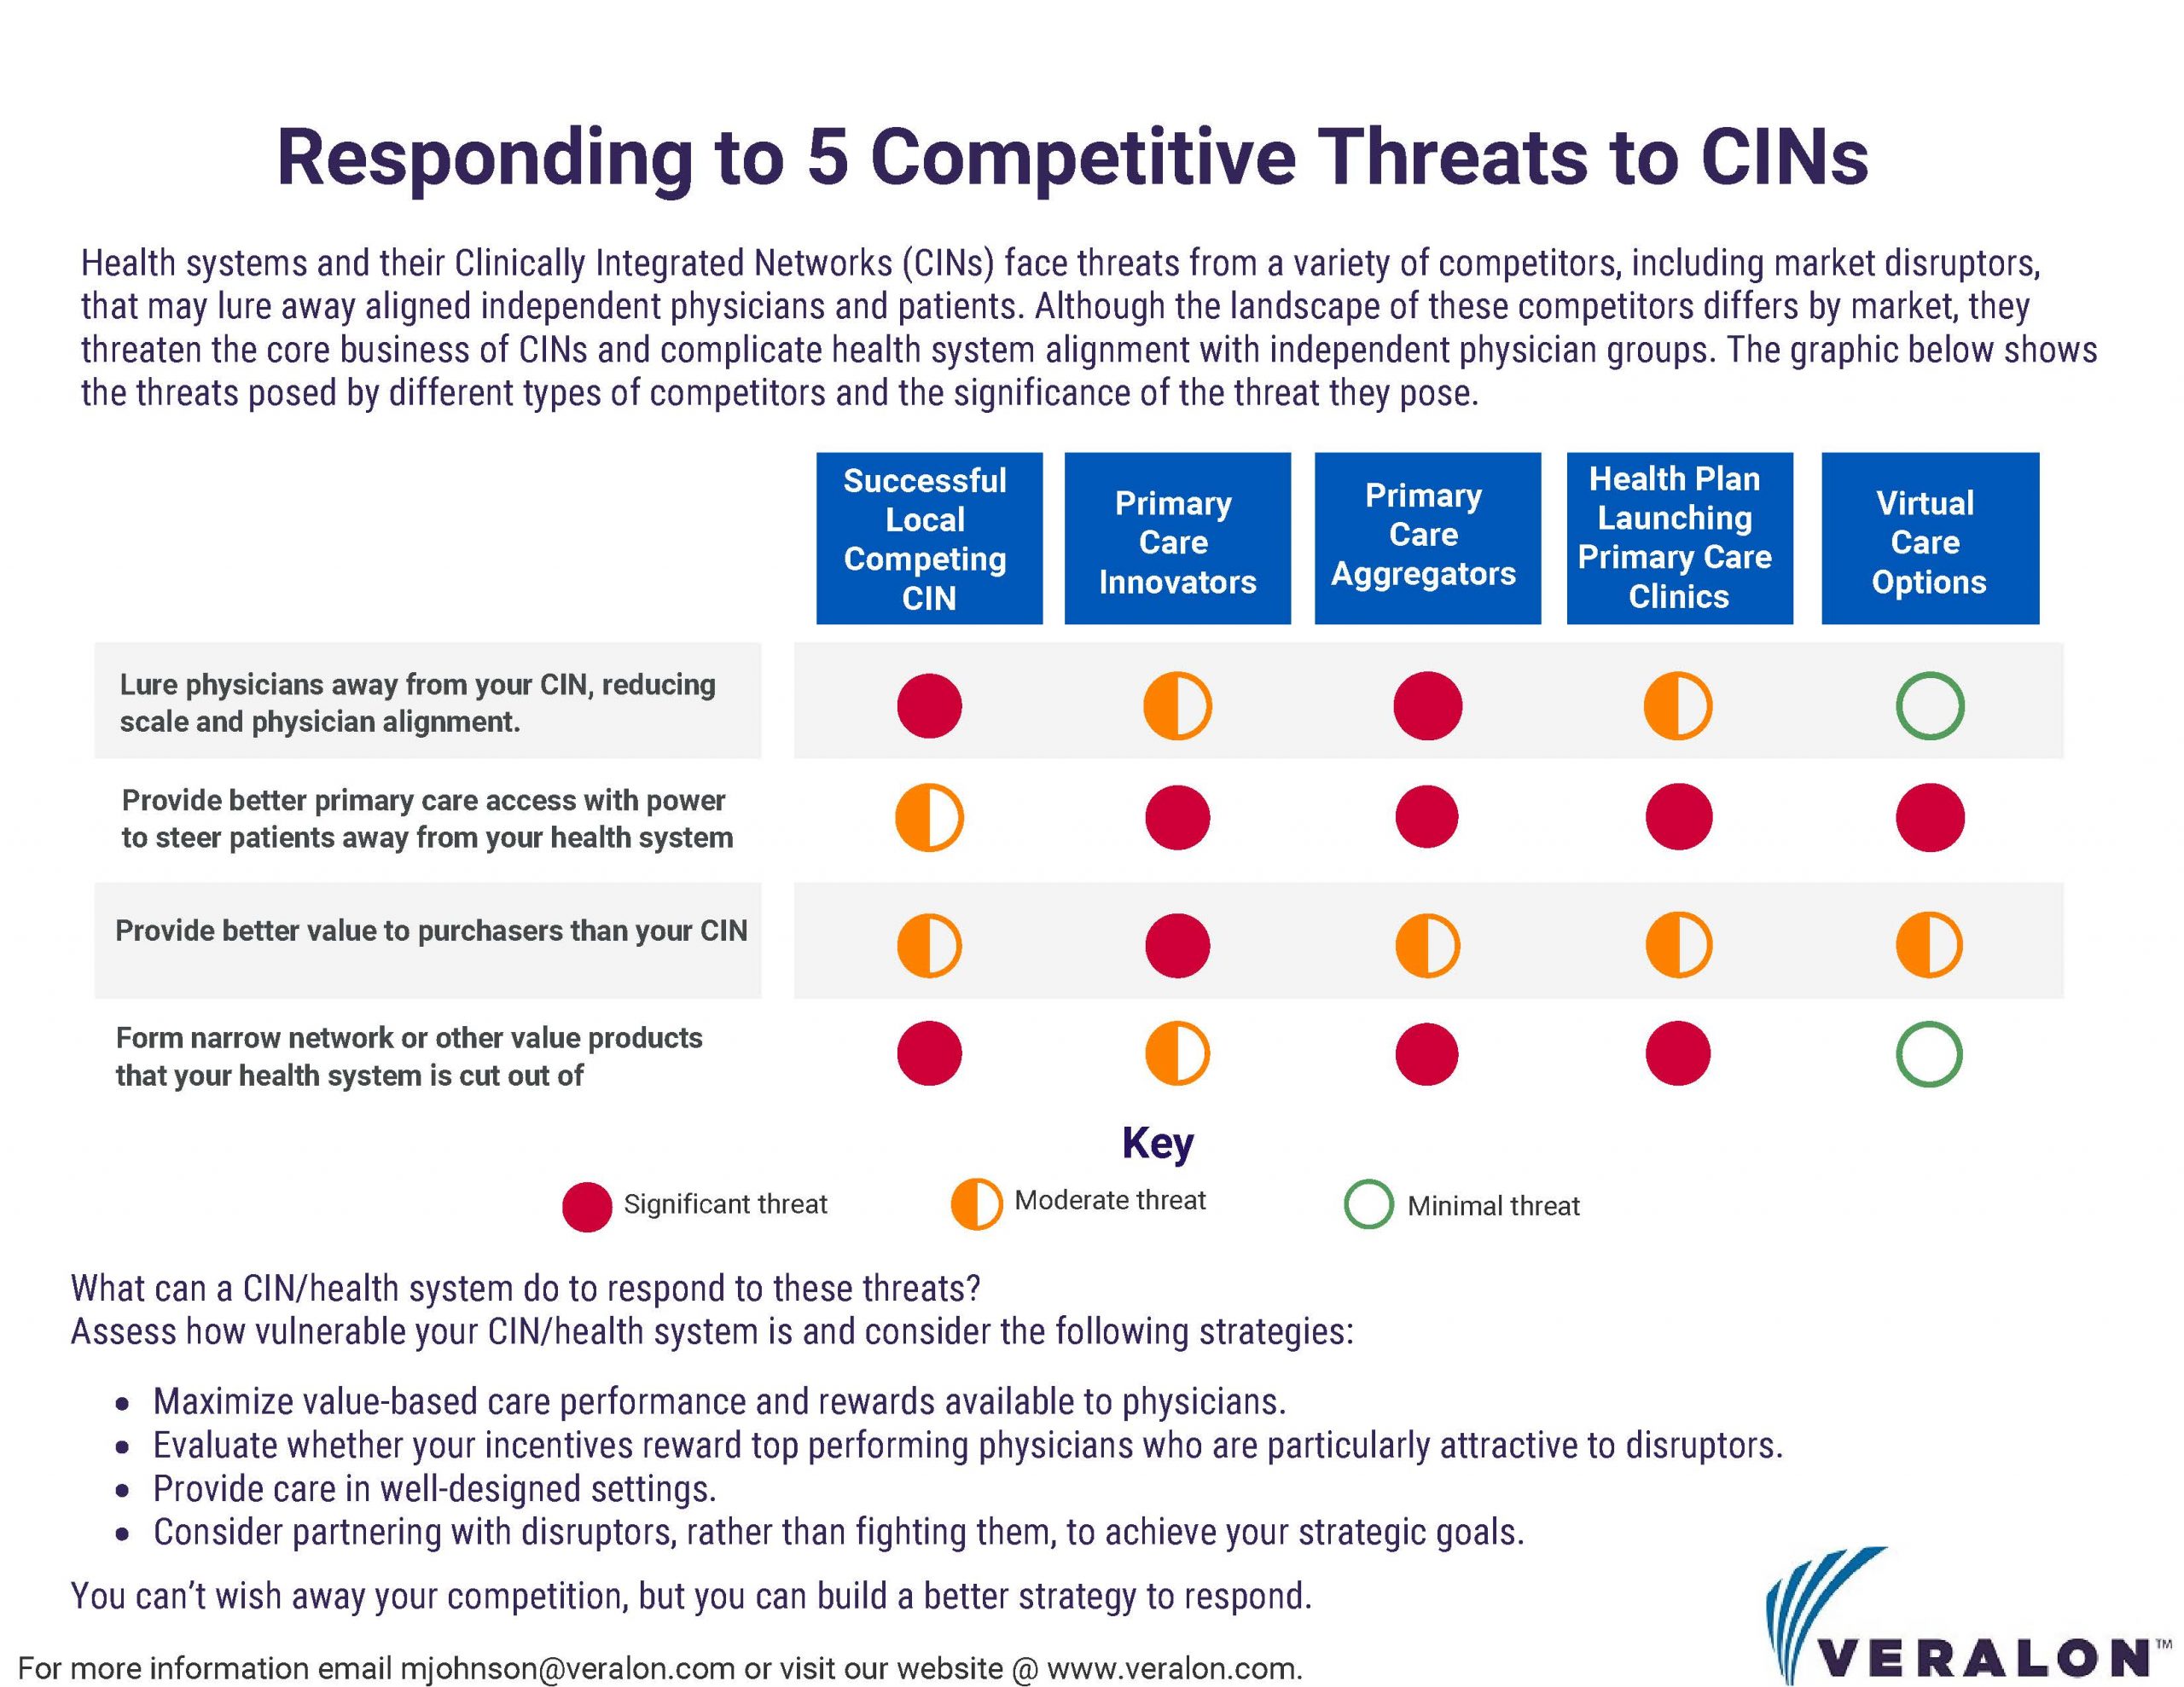 Veralon Infographic - Responding to 5 Competitive Threats to CINs